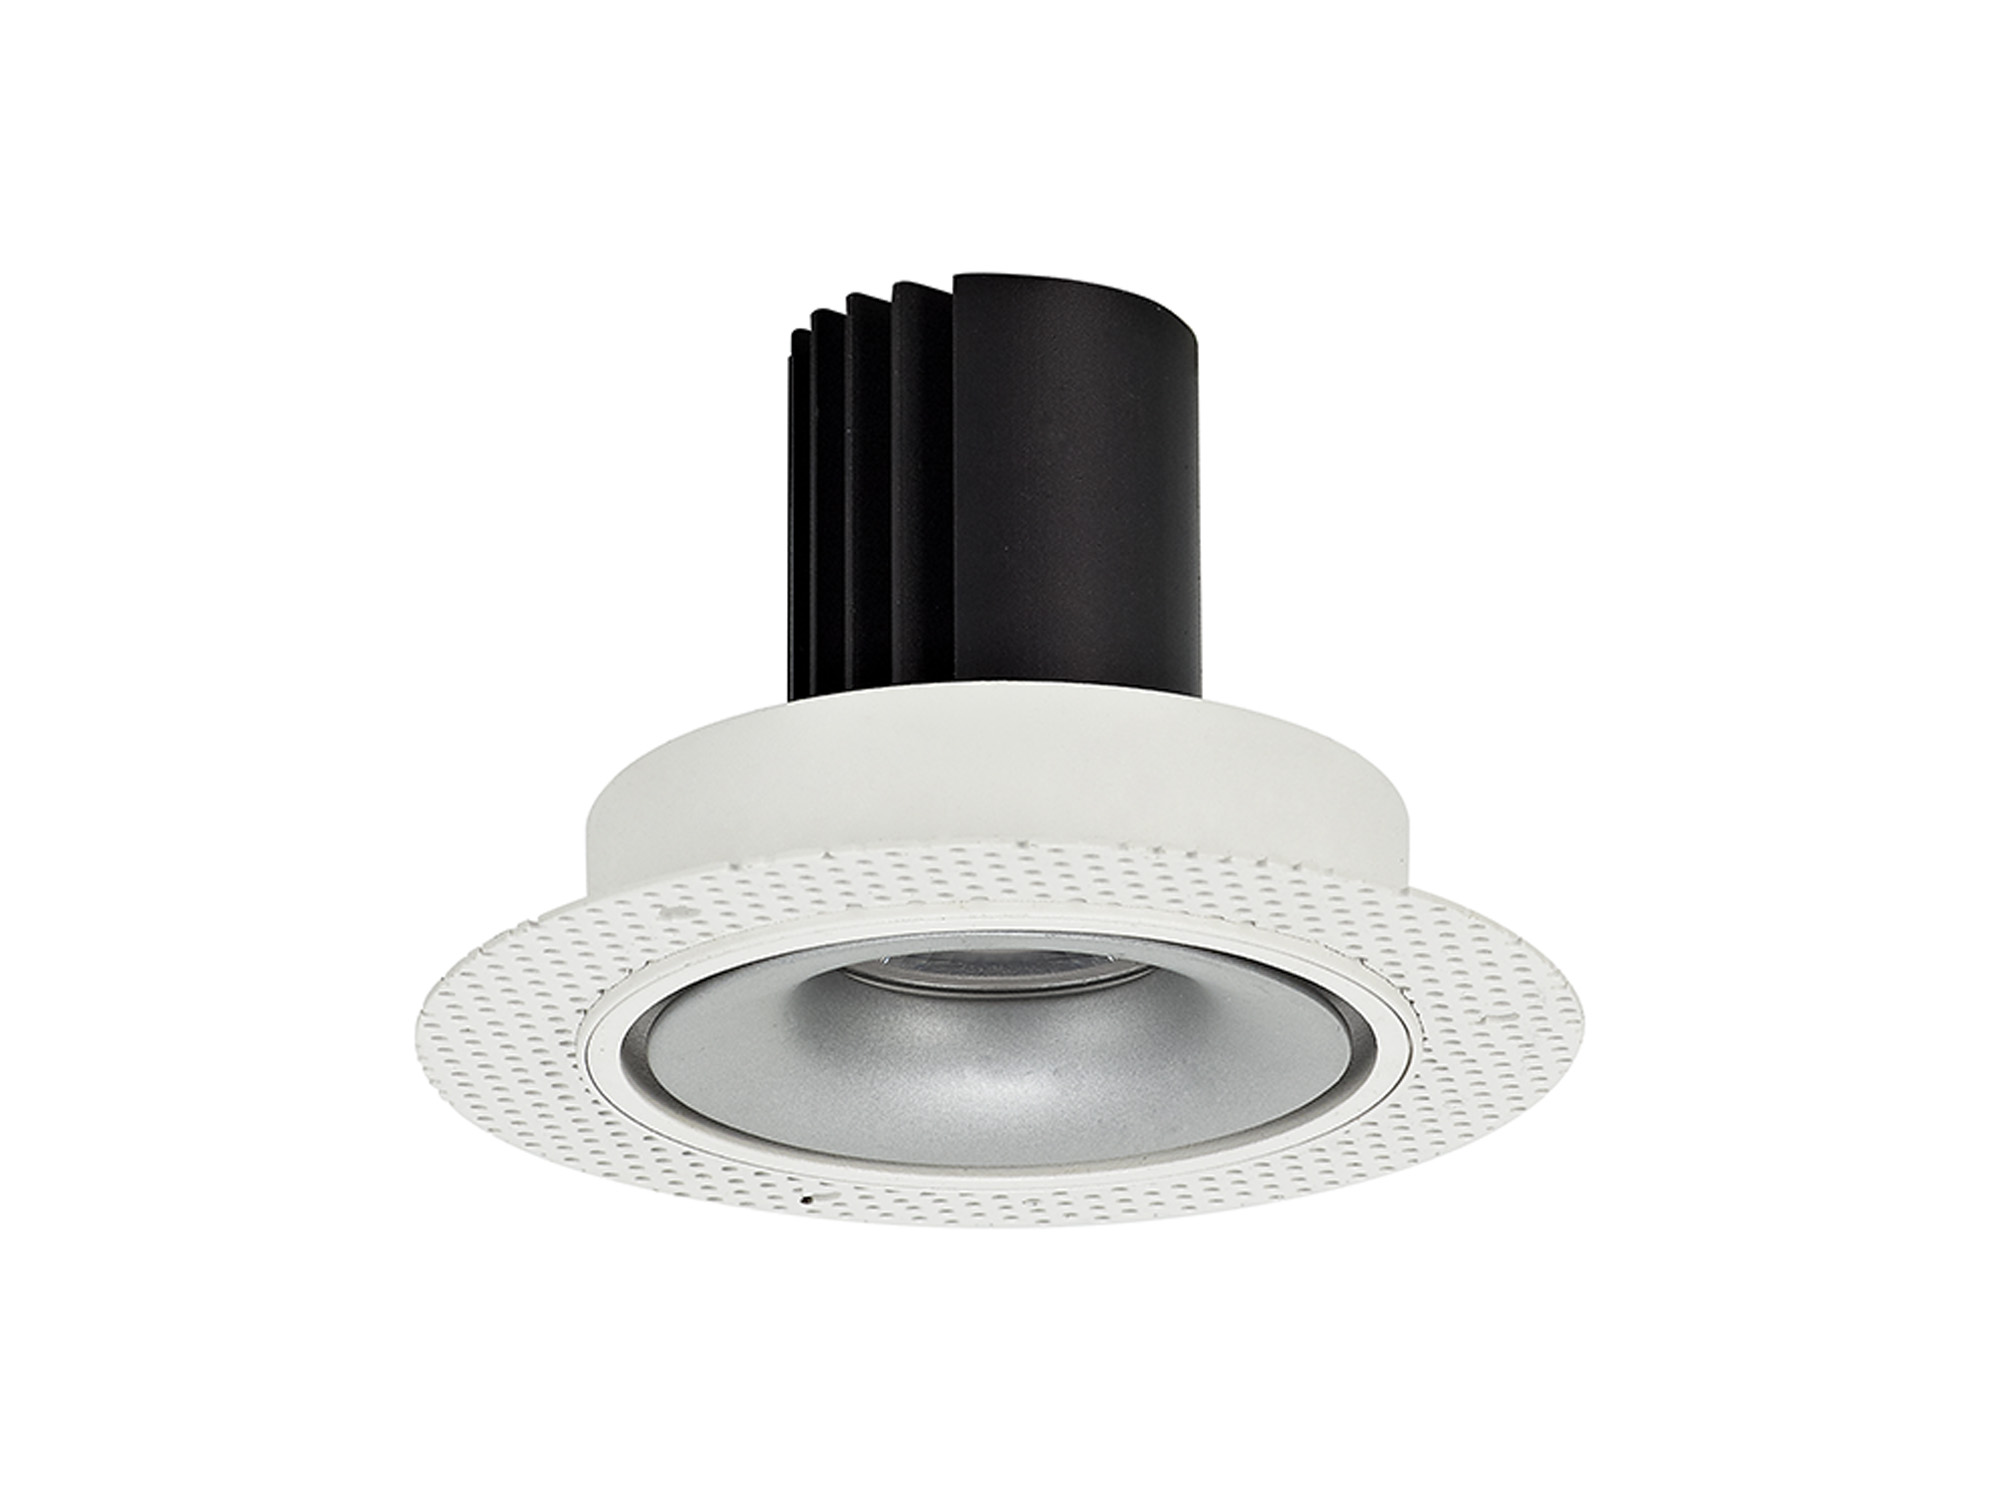 DM202189  Bolor T 12 Tridonic Powered 12W 2700K 1200lm 12° CRI>90 LED Engine White/Silver Trimless Fixed Recessed Spotlight; IP20